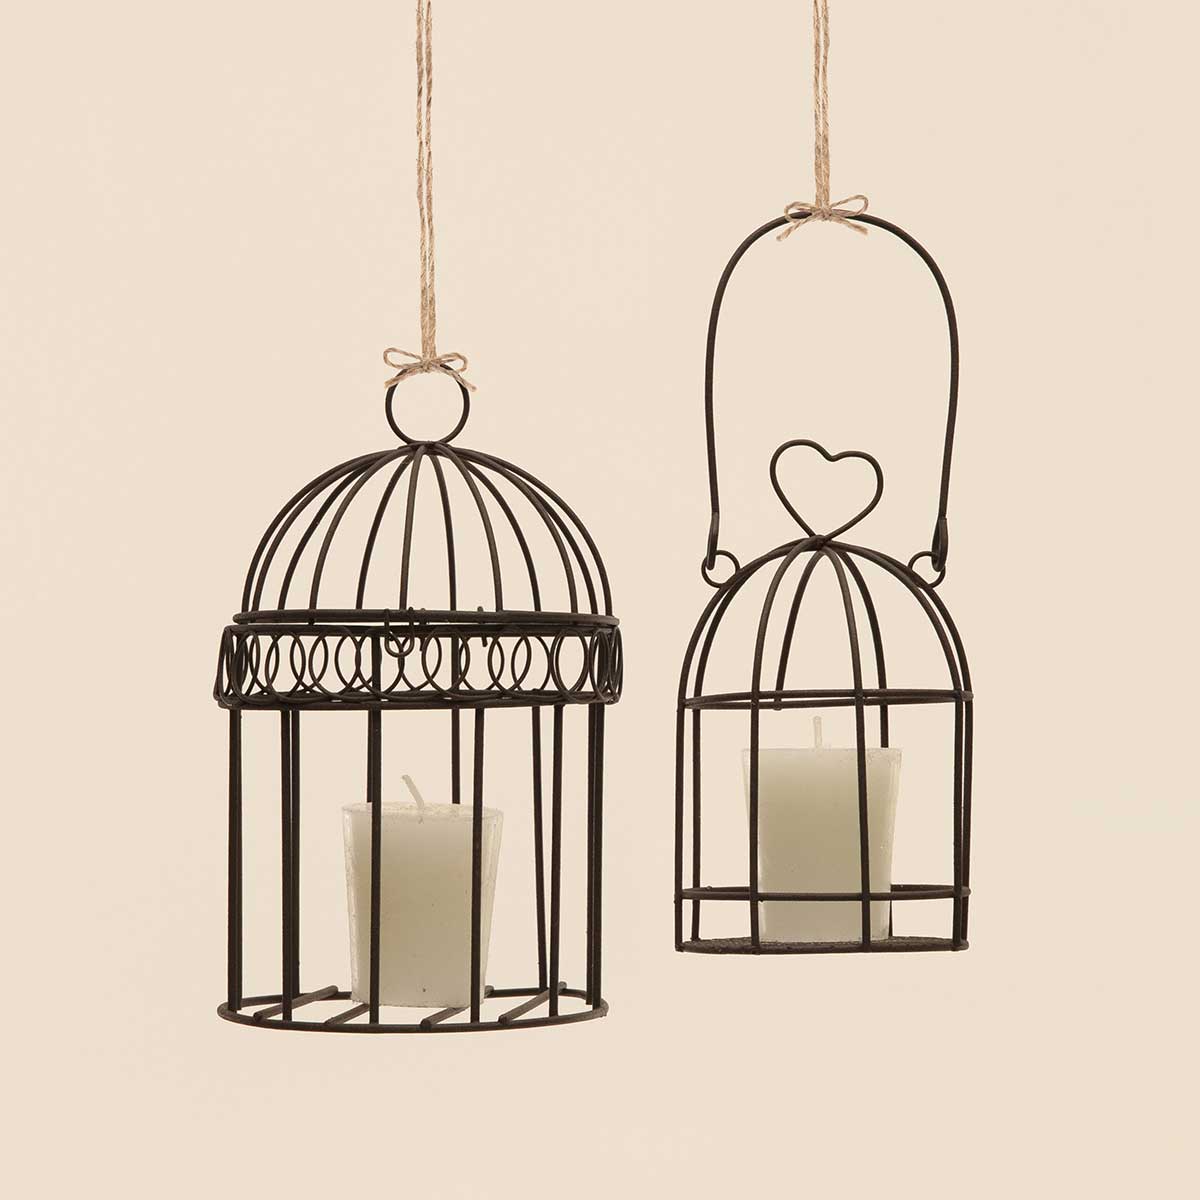 BIRD CAGE BROWN 4IN X 6.5IN BROWN METAL WITH TOP OPENING - Click Image to Close